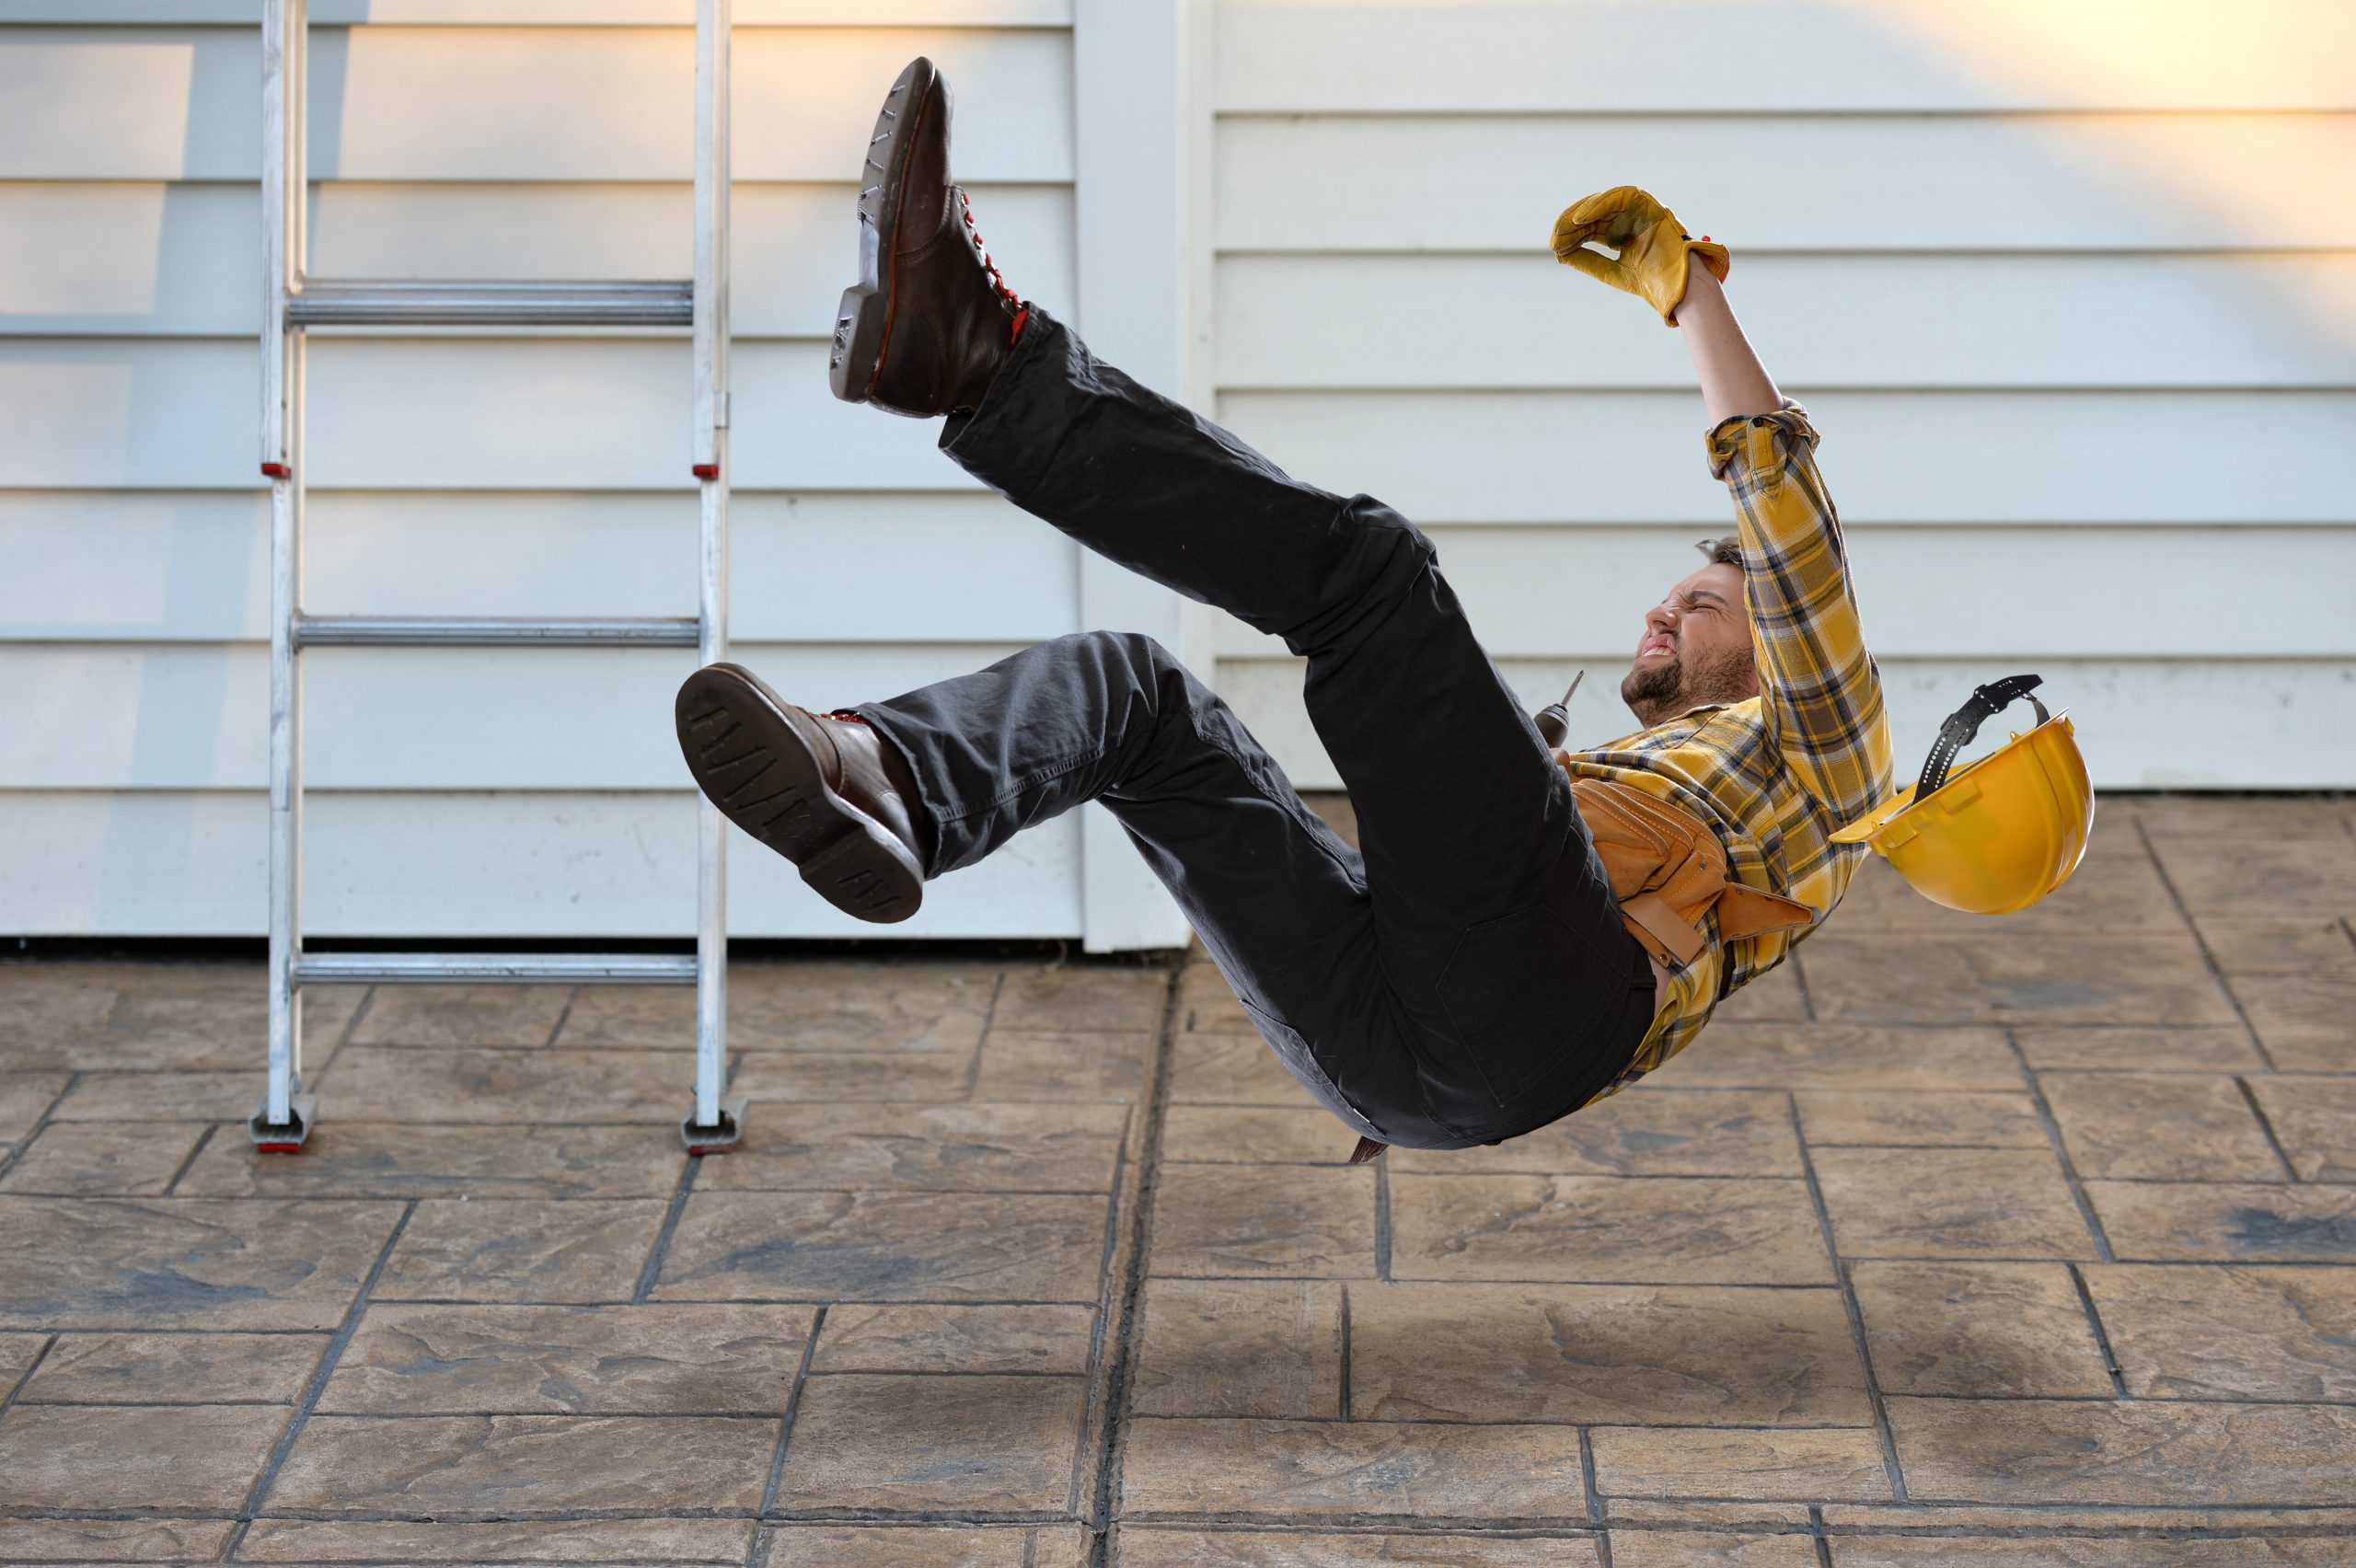 If You Had a Slip & Fall Accident, It’s Time to Call an Attorney